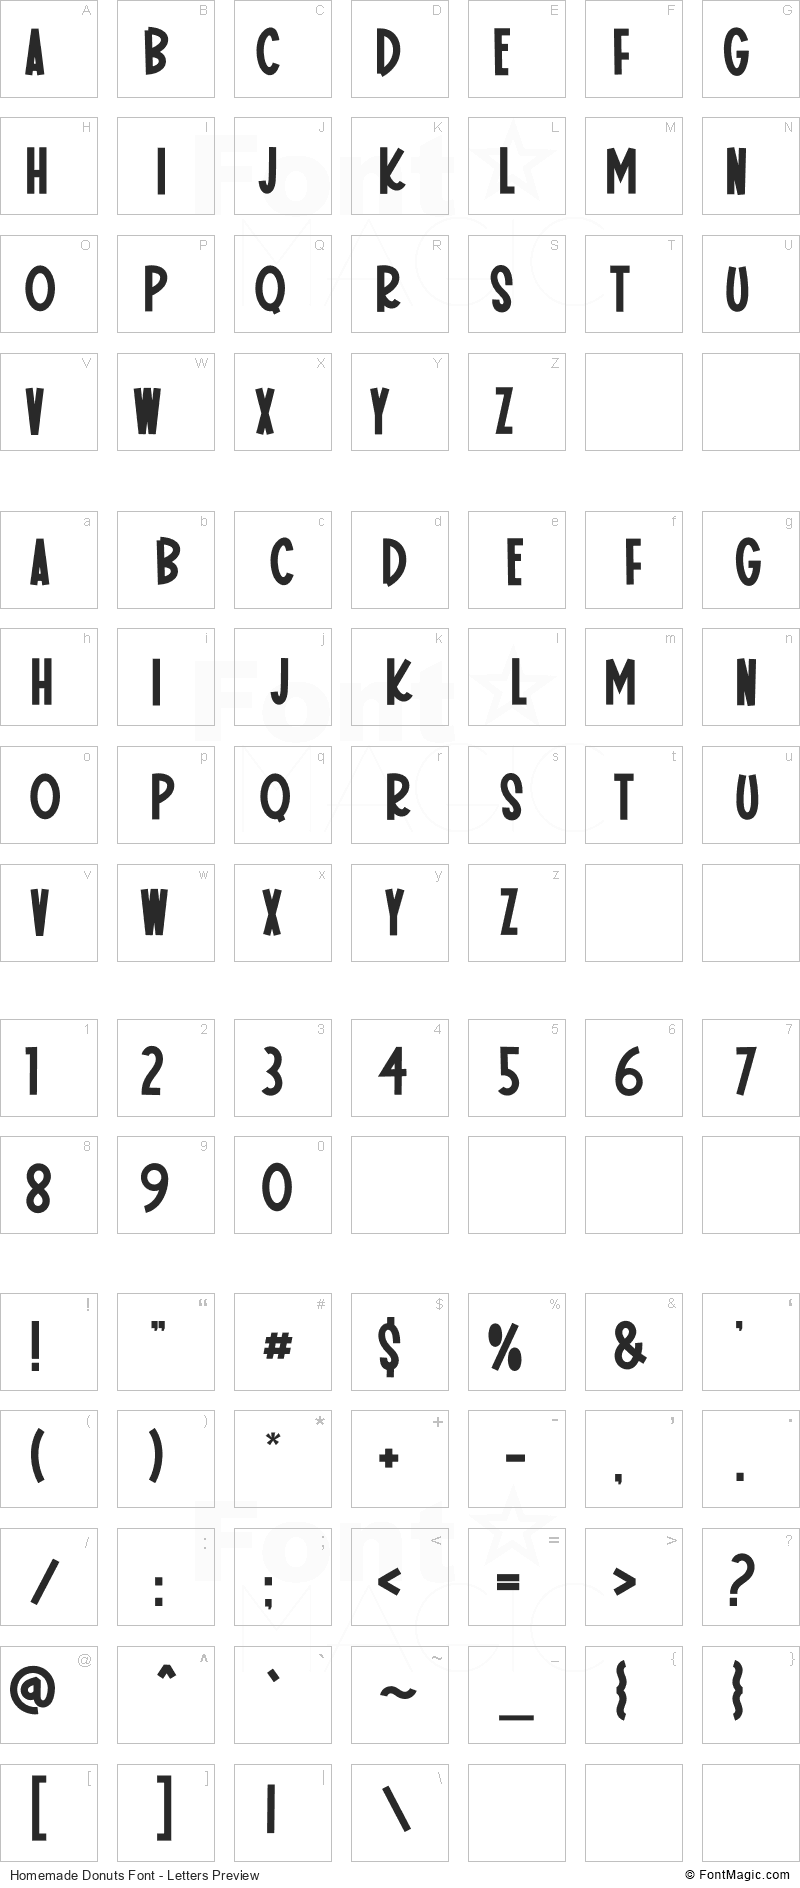 Homemade Donuts Font - All Latters Preview Chart